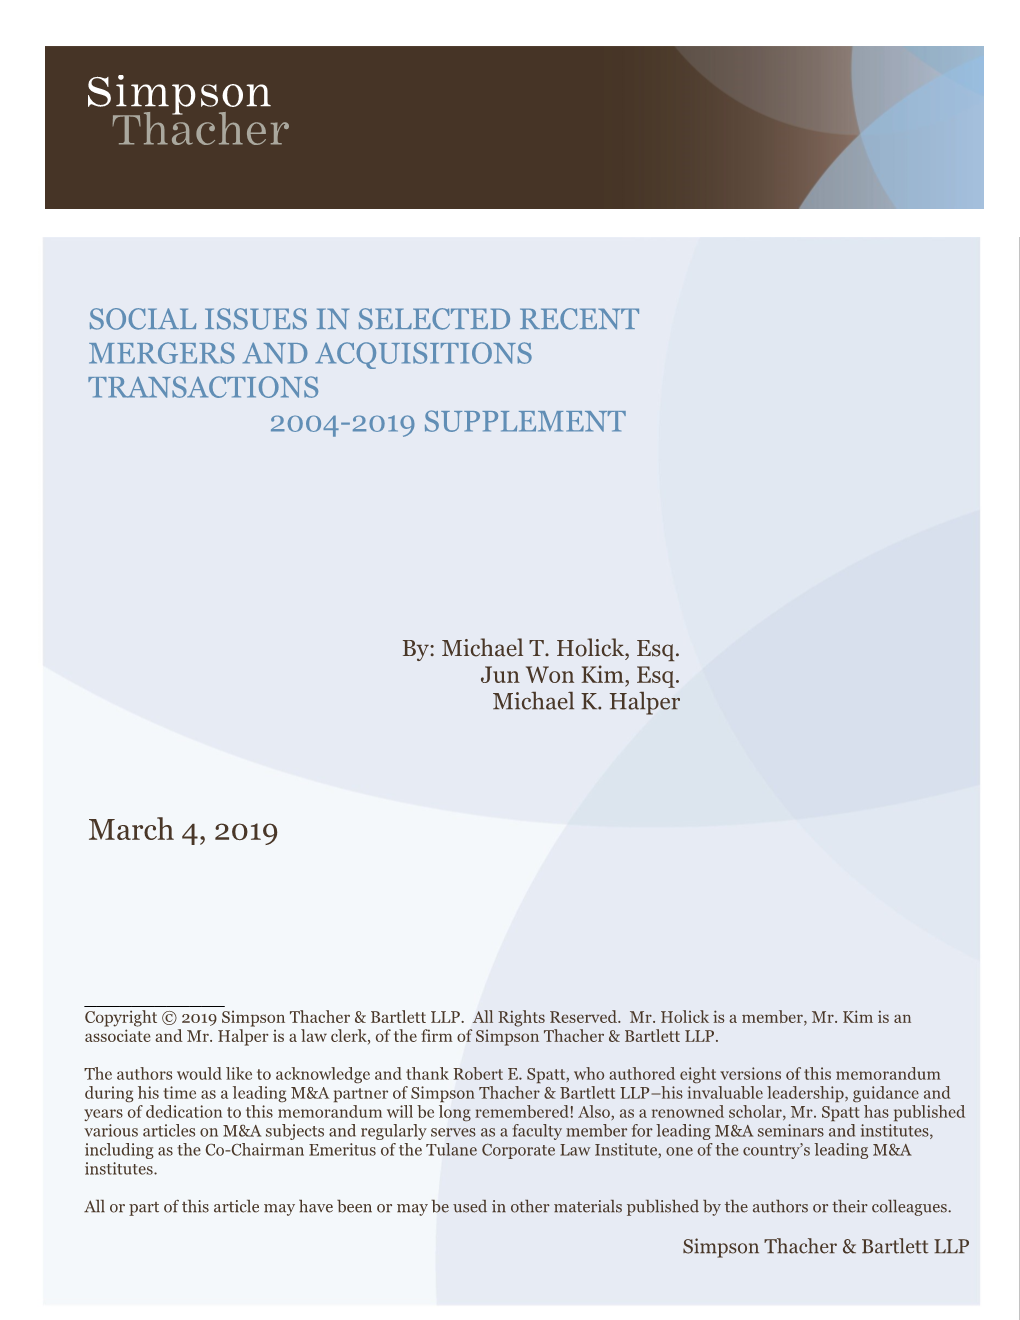 Social Issues in Selected Recent Mergers and Acquisitions Transactions 2004-2019 Supplement